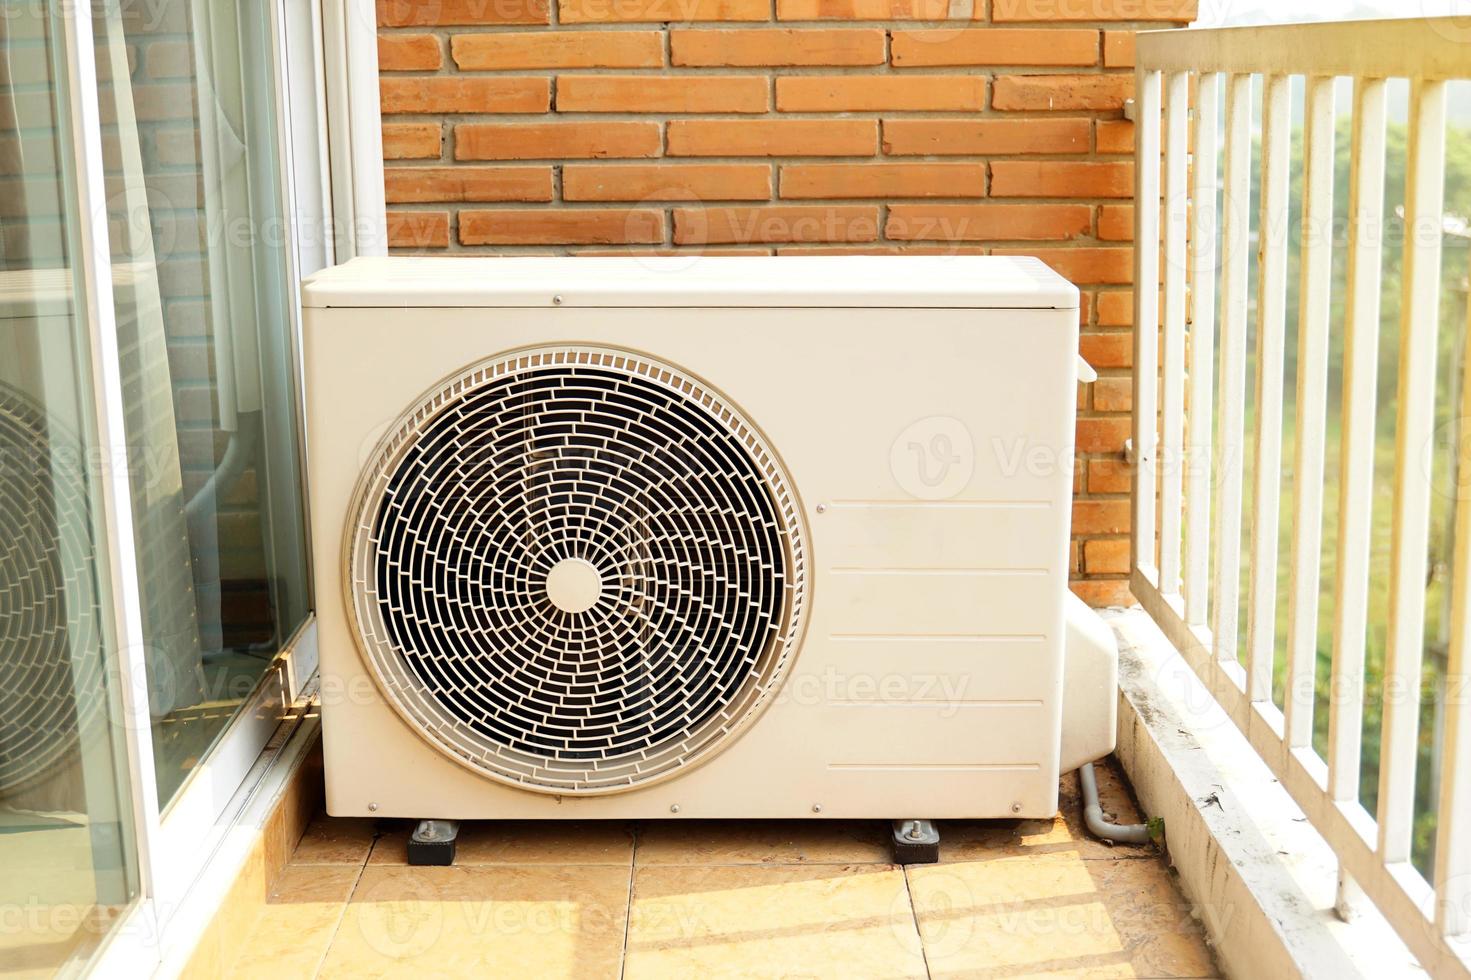 home air conditioner coil or condenser with motor installed outside the building perform cooling function. There are two types of cooling mediums, air cooled and water cooled. photo